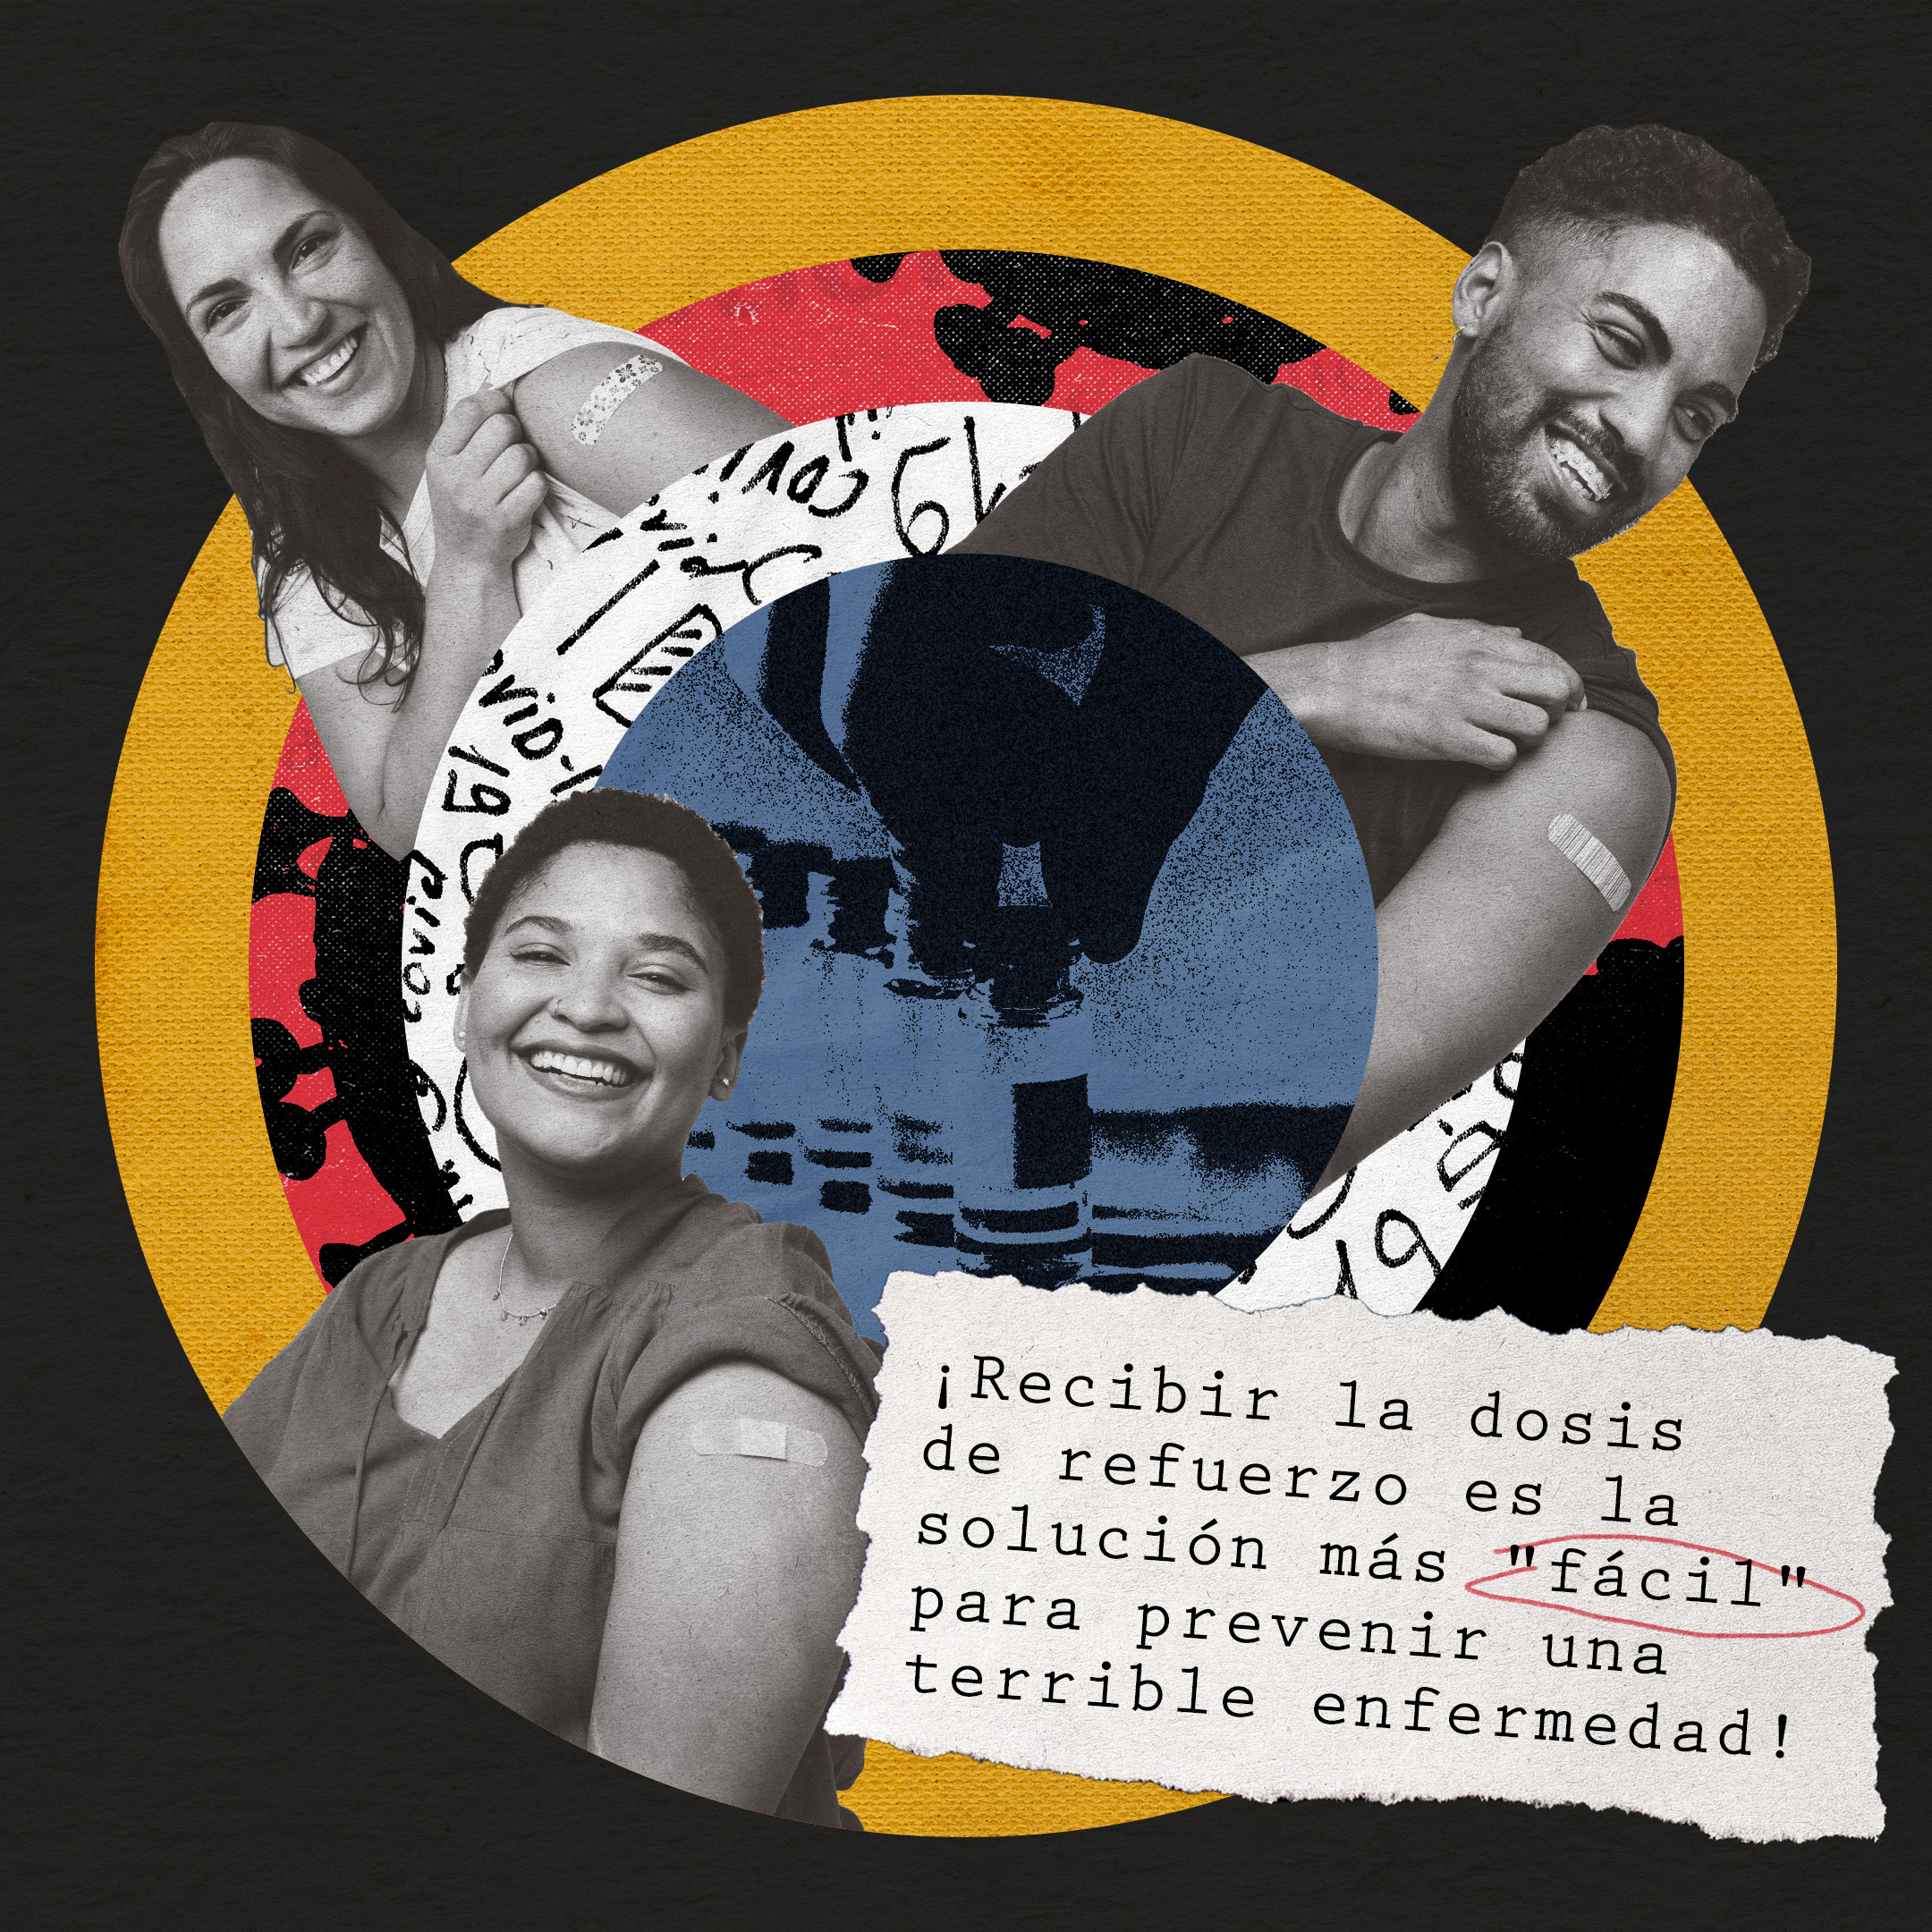 Three young people of multiple races/ethnicities smiling and showing adhesive bandages on their arm. Spanish text reads "Getting boosted is the "easiest" solution to prevent a terrible disease!"